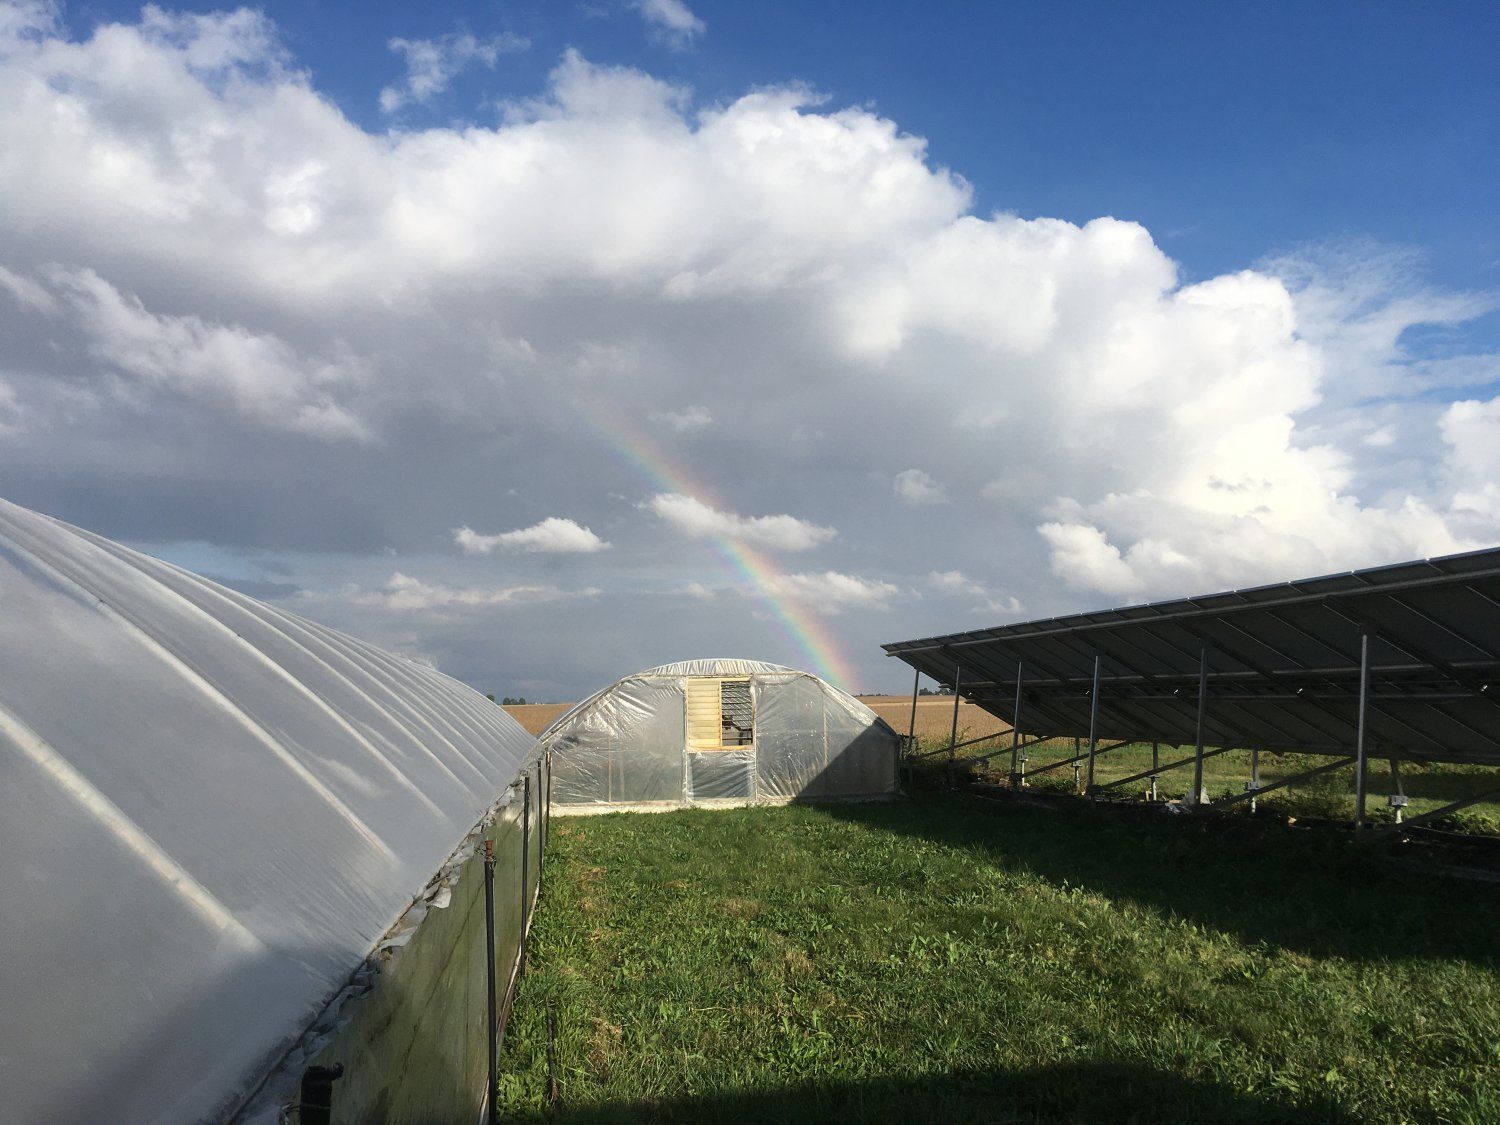 Previous Happening: Farm Happenings for October 13, 2021